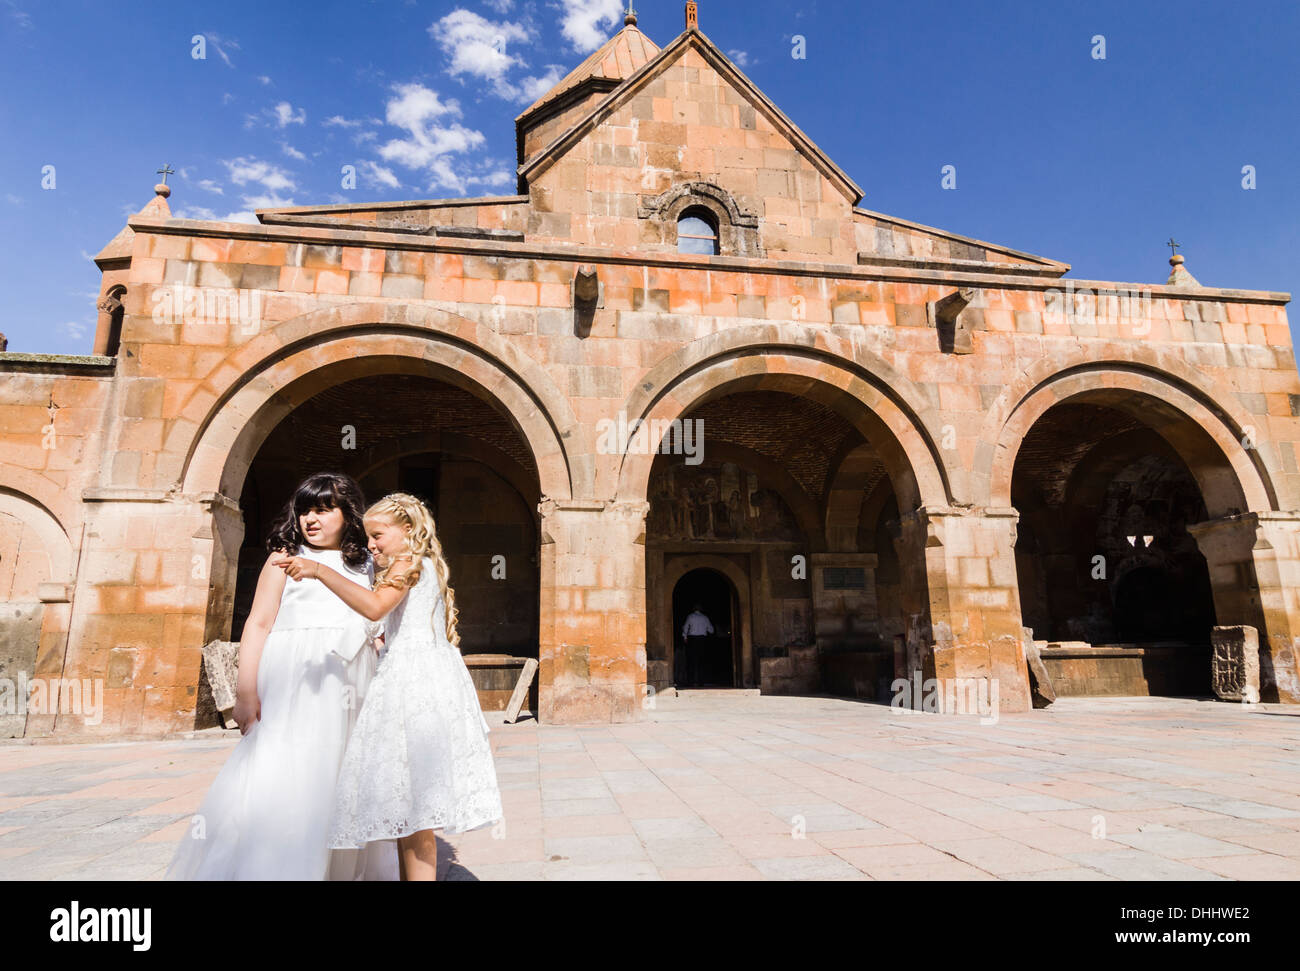 Two girls dressed in white, guests at a wedding at Surp Gayane church. Echmiadzin, Armenia Stock Photo